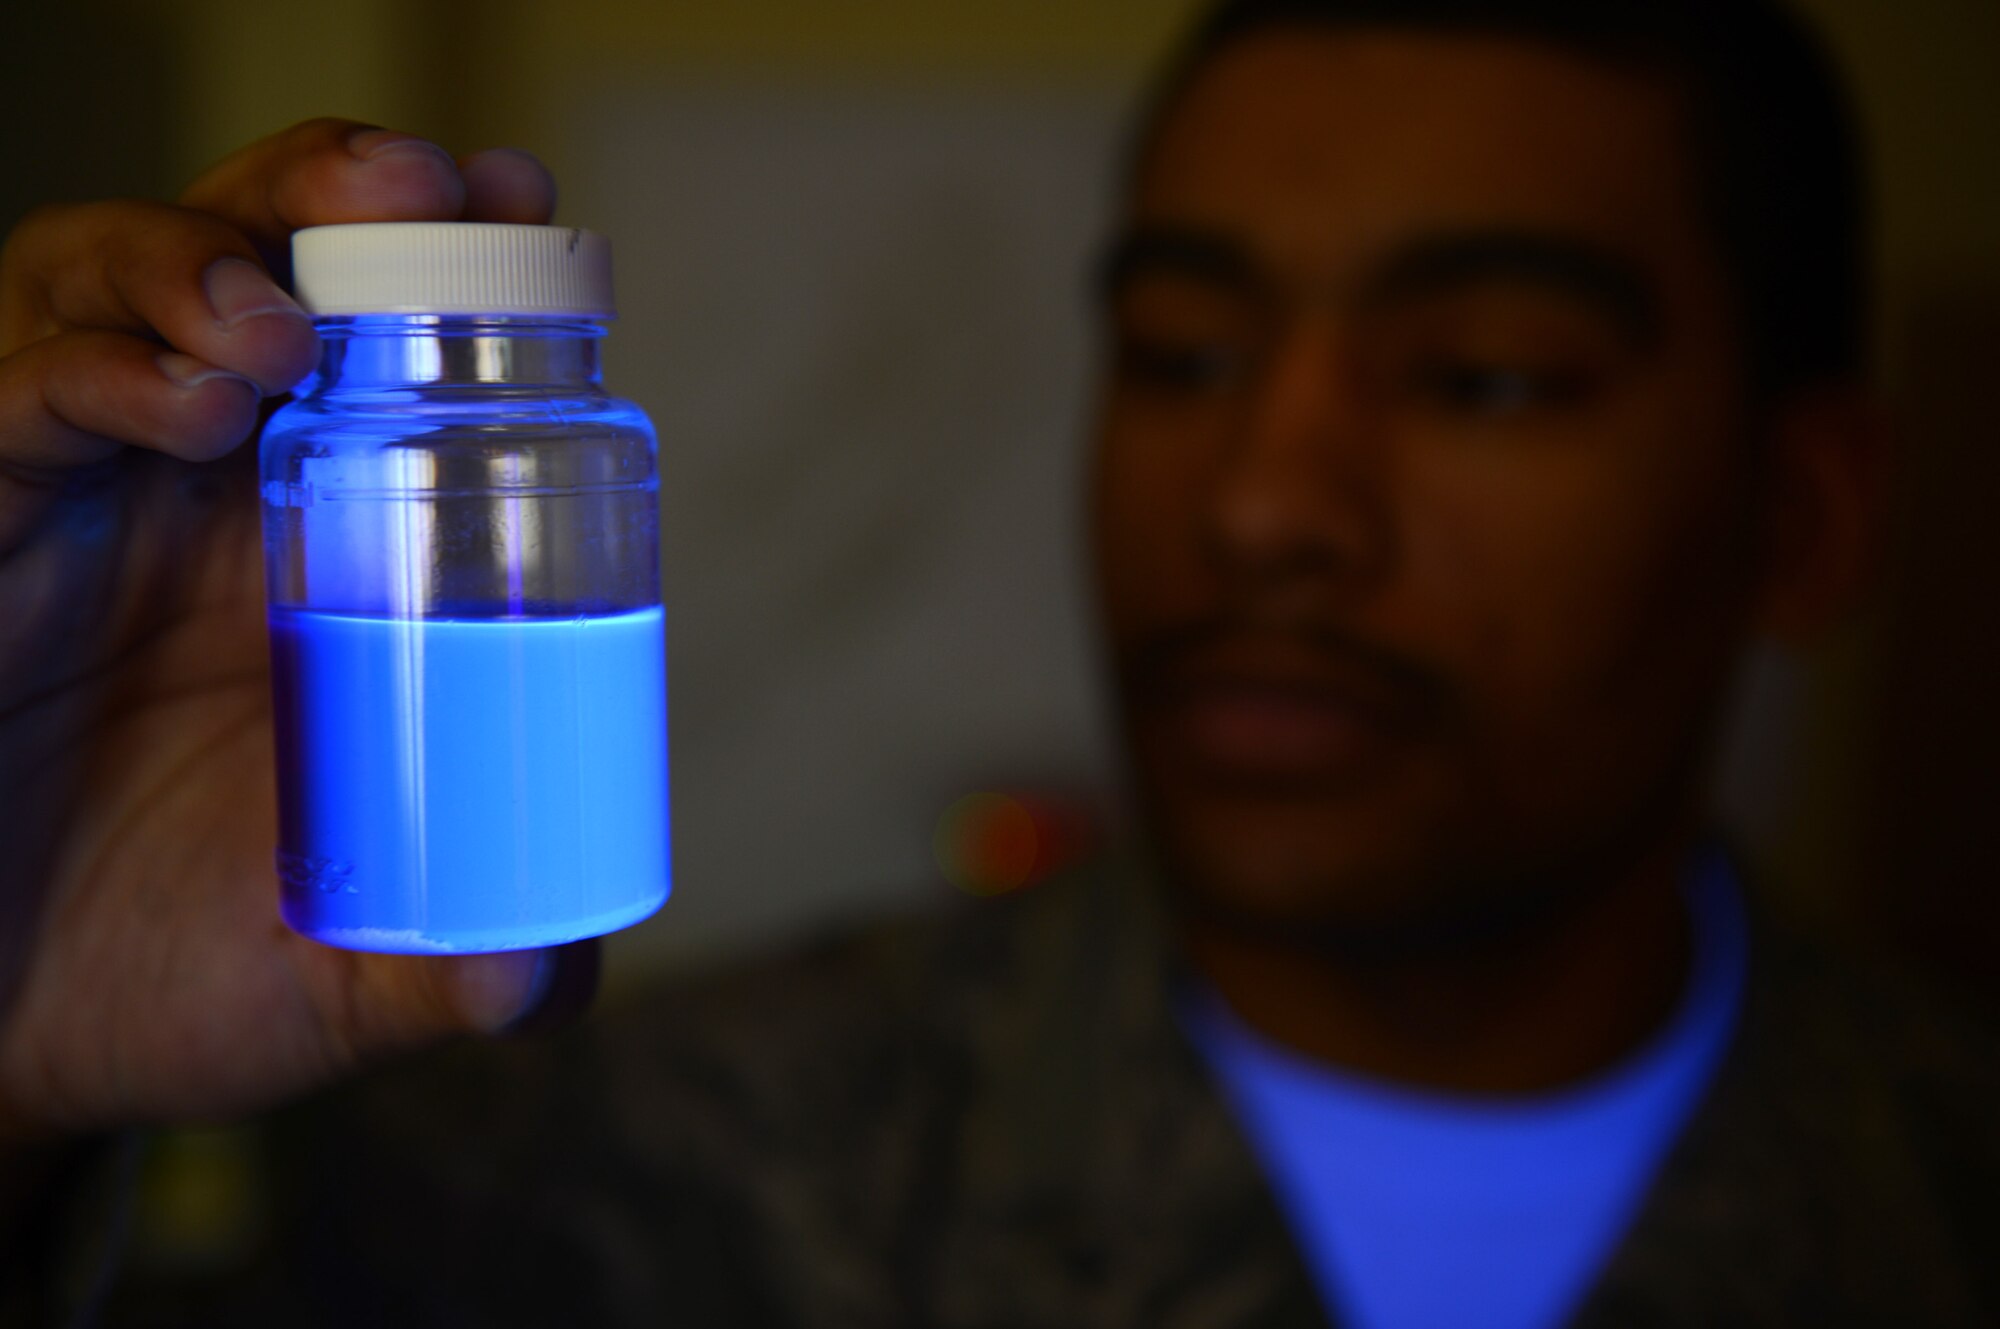 U.S. Air Force Airman 1st Class Bruce Moore, 52nd Aerospace Medicine Squadron bioenvironmental technician from Kansas City, Mo., examines a water sample under a black-light at Spangdahlem Air Base, Germany, March 28, 2014. Colilert is added to the water sample to detect the presence of bacteria. If bacteria is present, the water will glow under a black-light. (U.S. Air Force photo by Airman 1st Class Kyle Gese/Released)